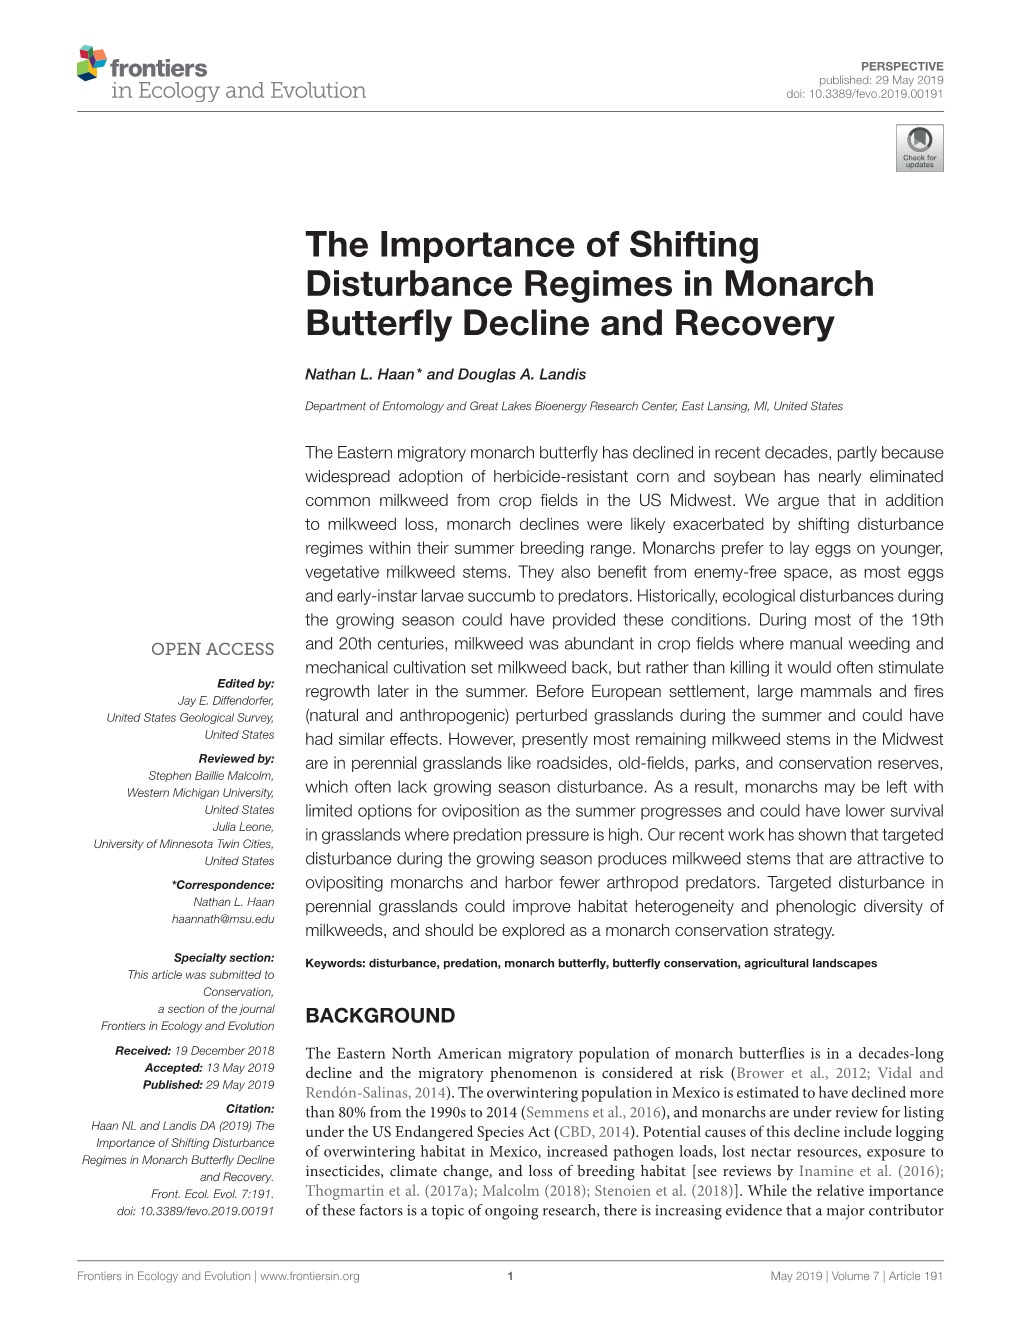 The Importance of Shifting Disturbance Regimes in Monarch Butterﬂy Decline and Recovery